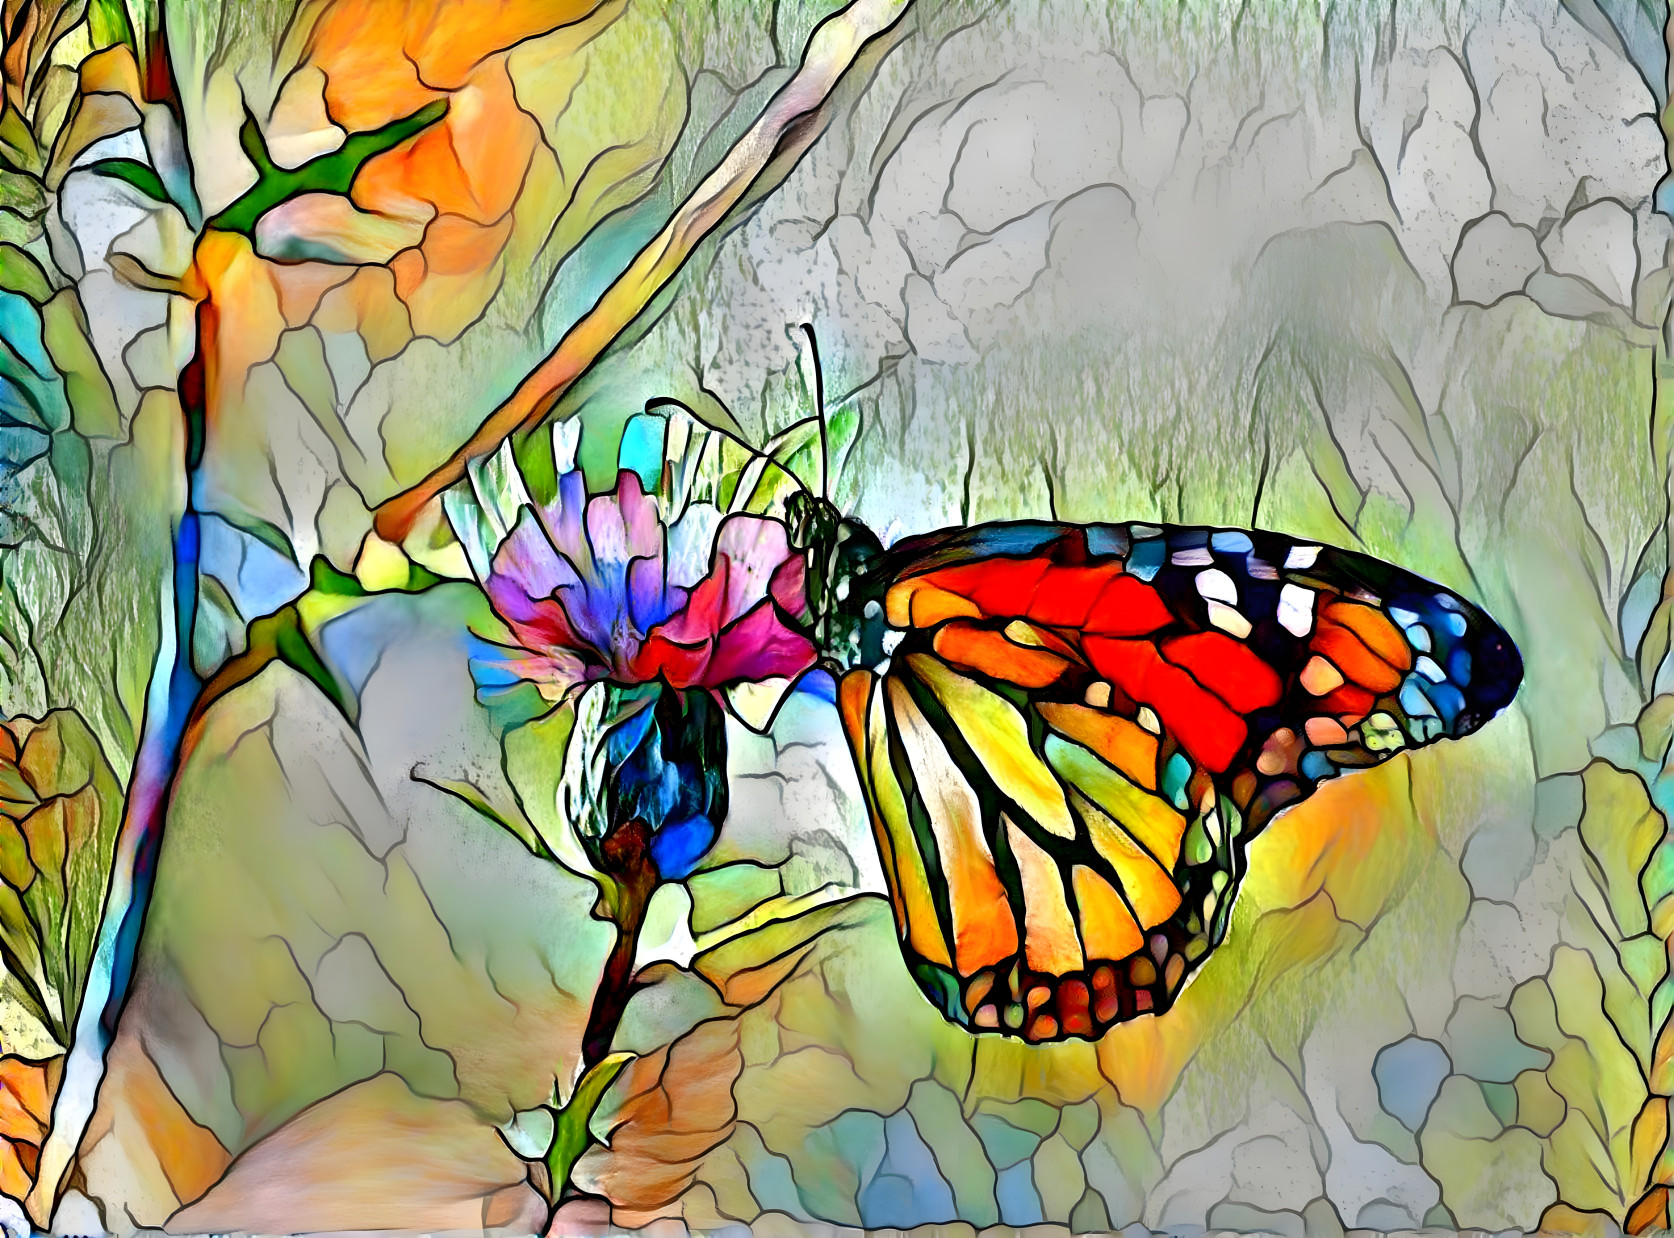 "Stained Glass Butterfly"